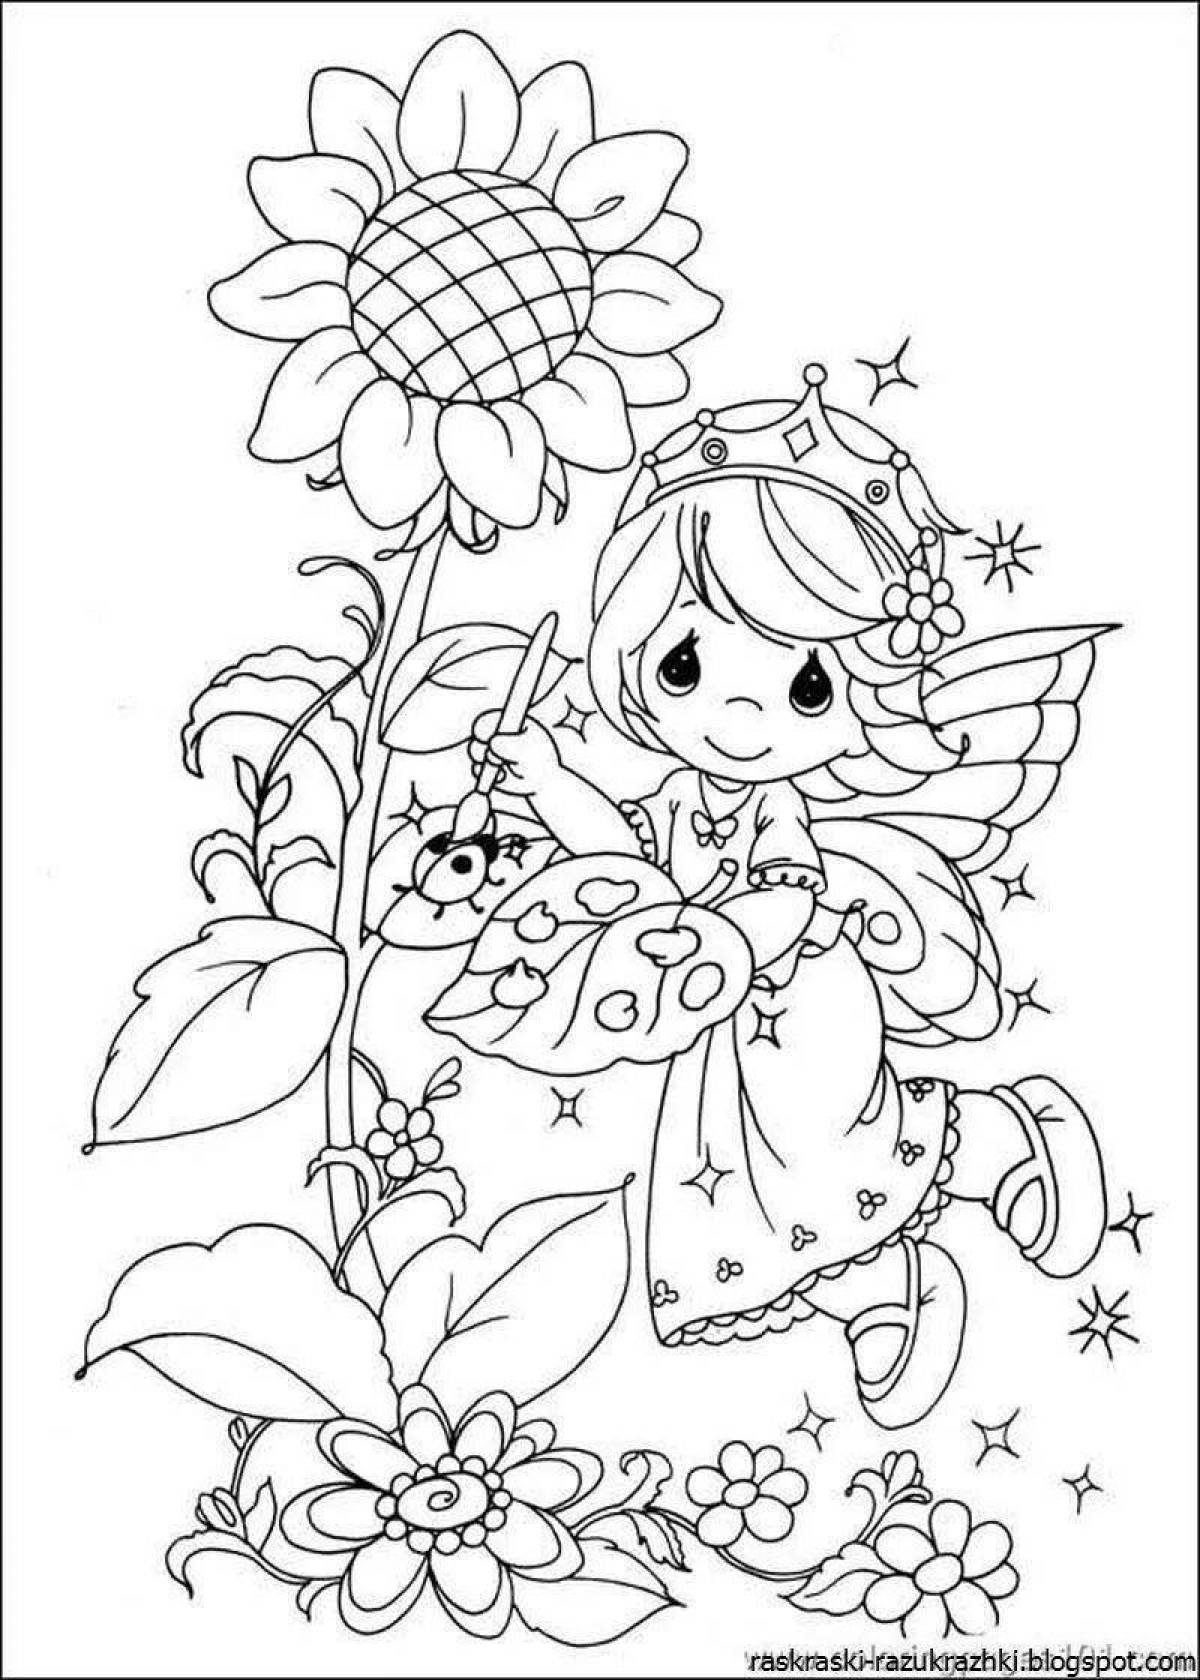 Fancy coloring book for girls 5-6 years old